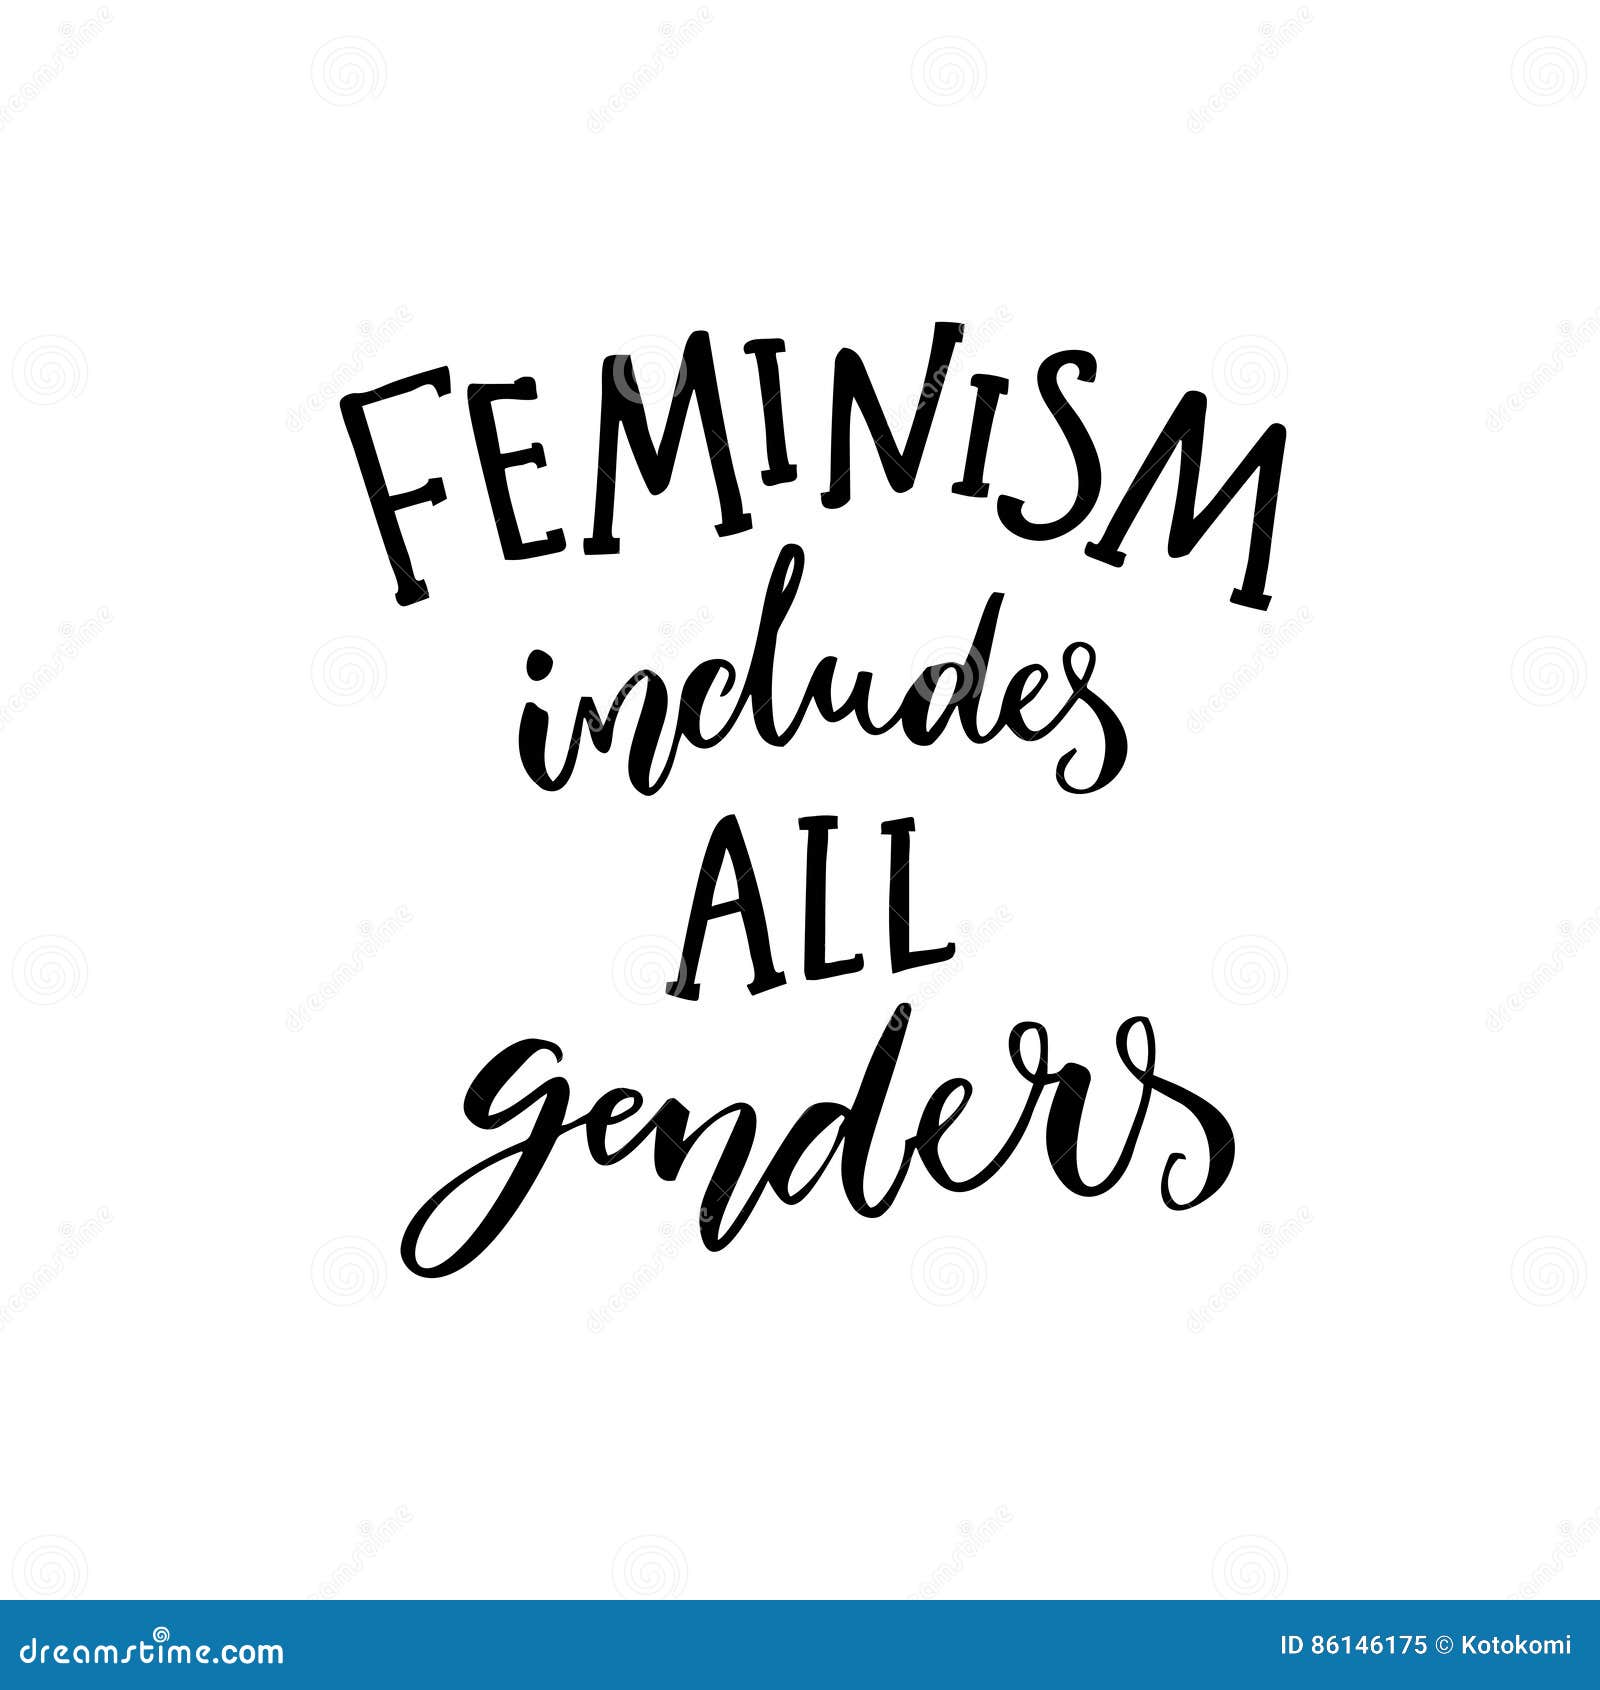 feminism includes all genders. feminist saying about equality of women and men. inspirational quote, modern calligraphy